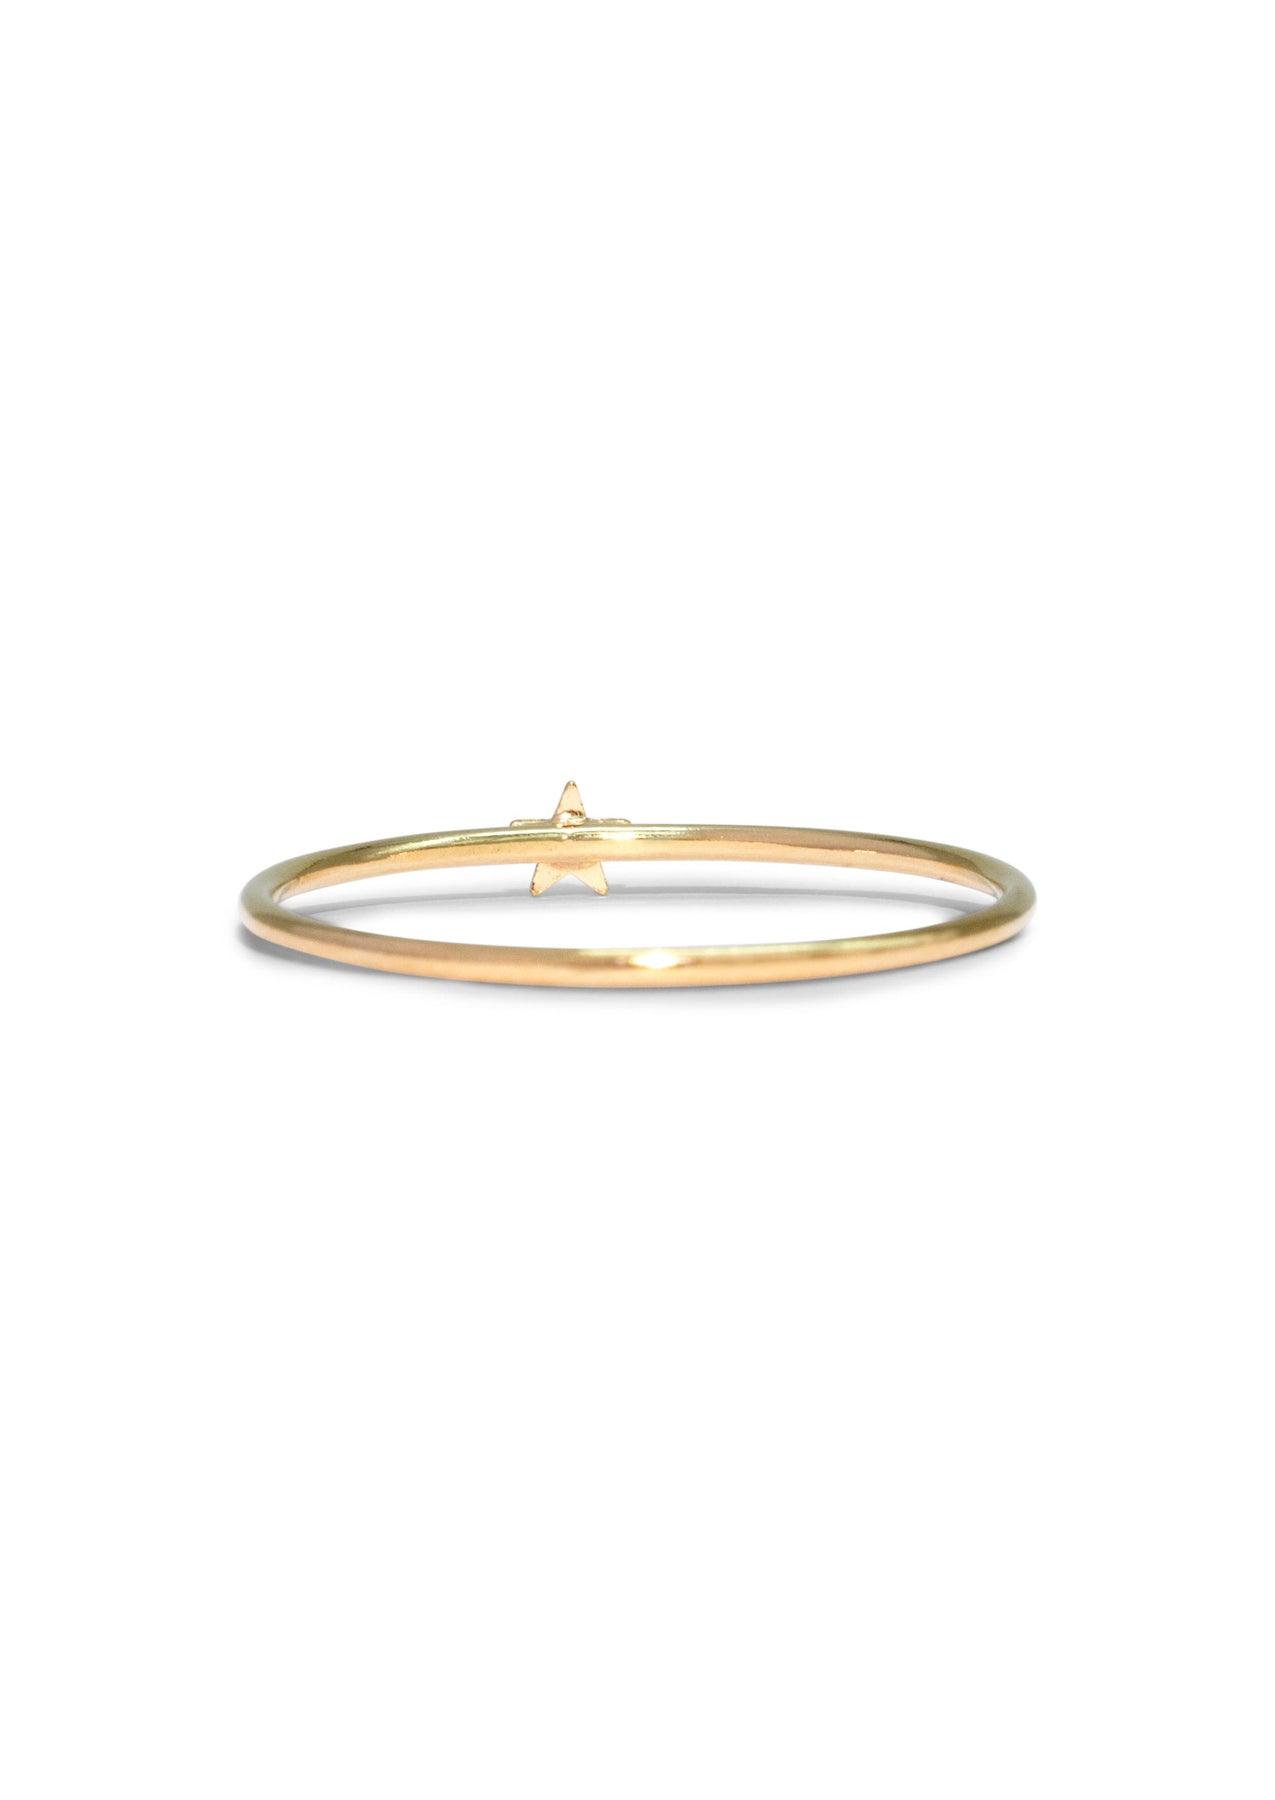 The Teeny Star 14ct Gold Filled Ring - Molten Store